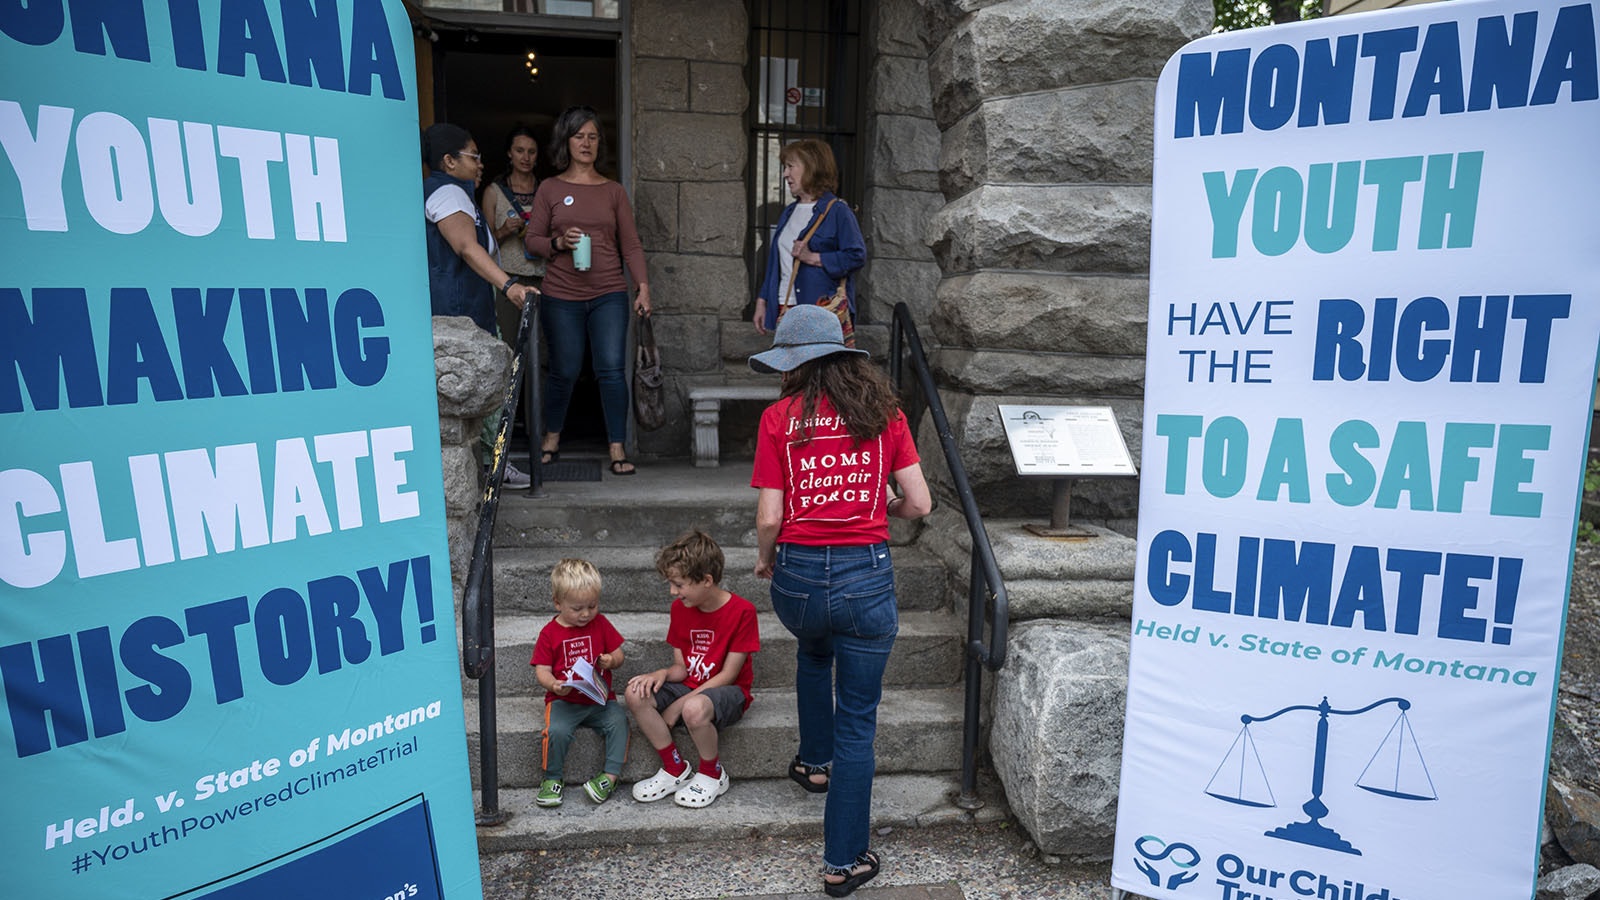 Supporters gather at a theater next to the courthouse to watch the court proceedings for the nation's first youth climate change trial at Montana's First Judicial District Court in Helena, Montana.